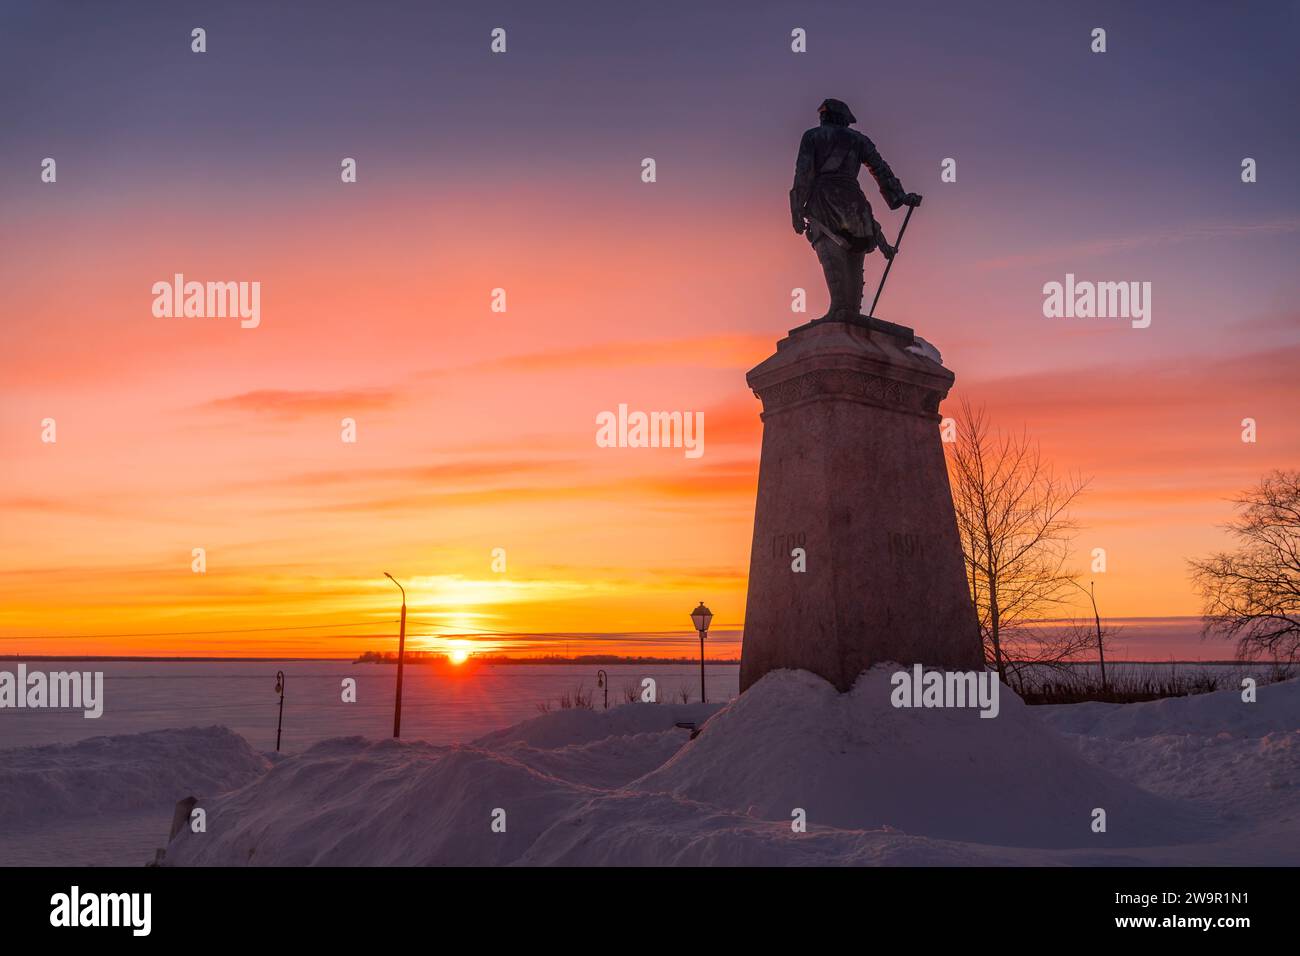 The monument of Russian Emperor Peter the Great (Peter I) in the Arkhangelsk waterfront during the colorful sunset on the cold snowy winter day in Rus Stock Photo